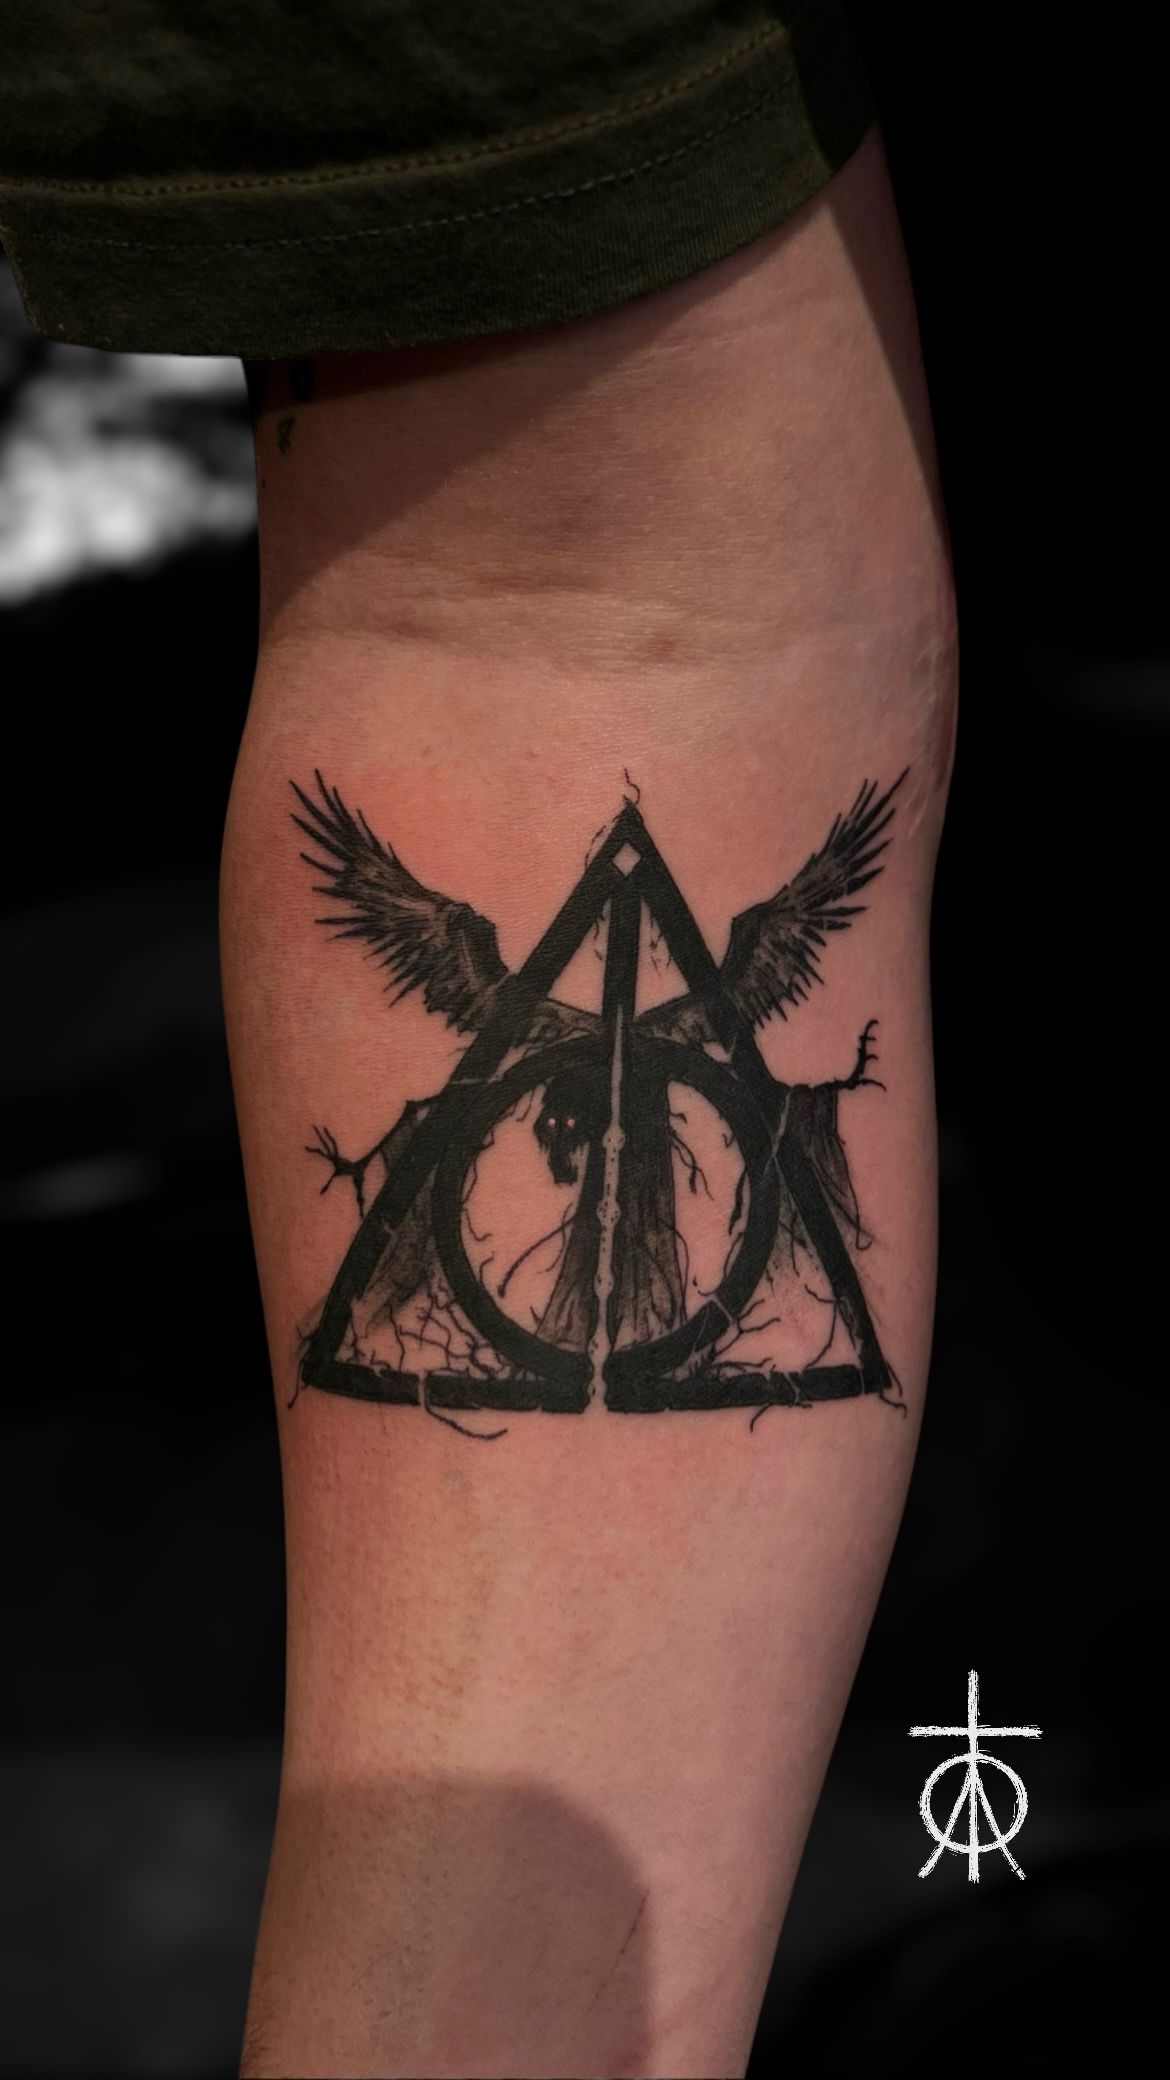 Tattoo uploaded by Ross Young • Harry Potter Deathly Hallows Tattoo on my  left forearm • Tattoodo